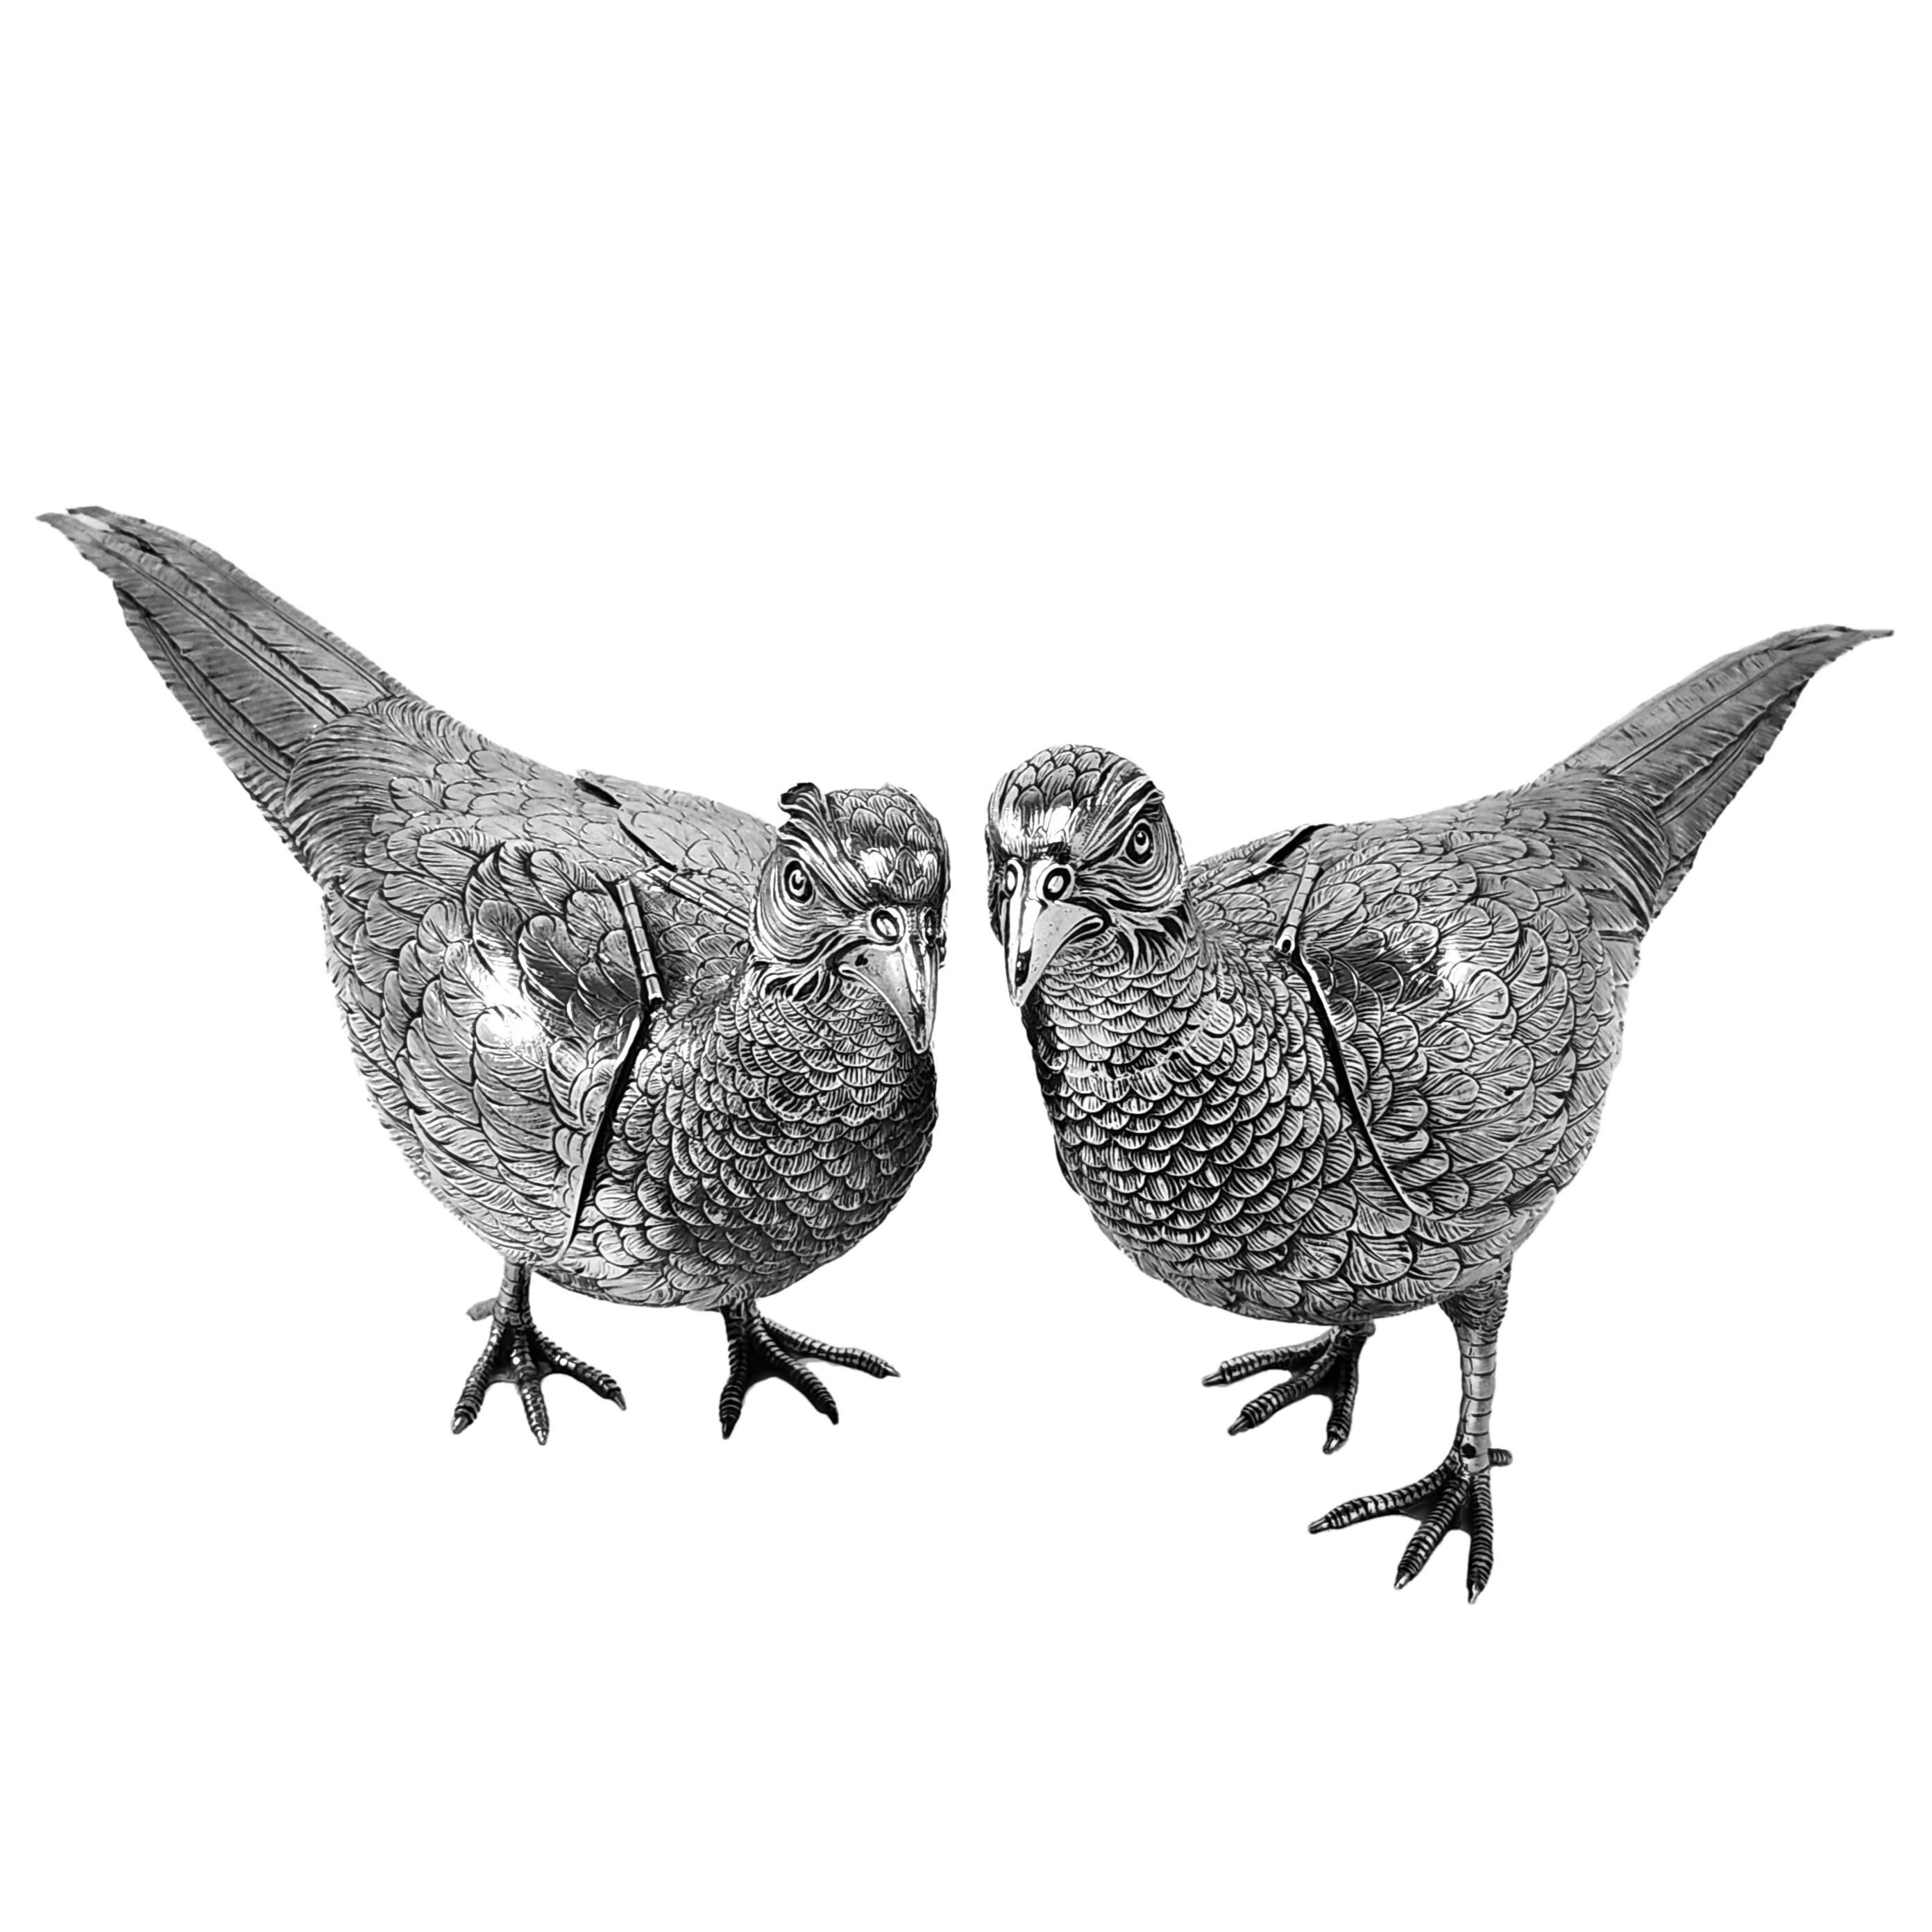 A magnificent pair of Antique Continental Silver Pheasants of notably large size. The pair of Silver Pheasants comprises of a Cock Pheasant and Hen Pheasant. Each Antique Silver Bird is created with a lovely attention to detail and each has hinged